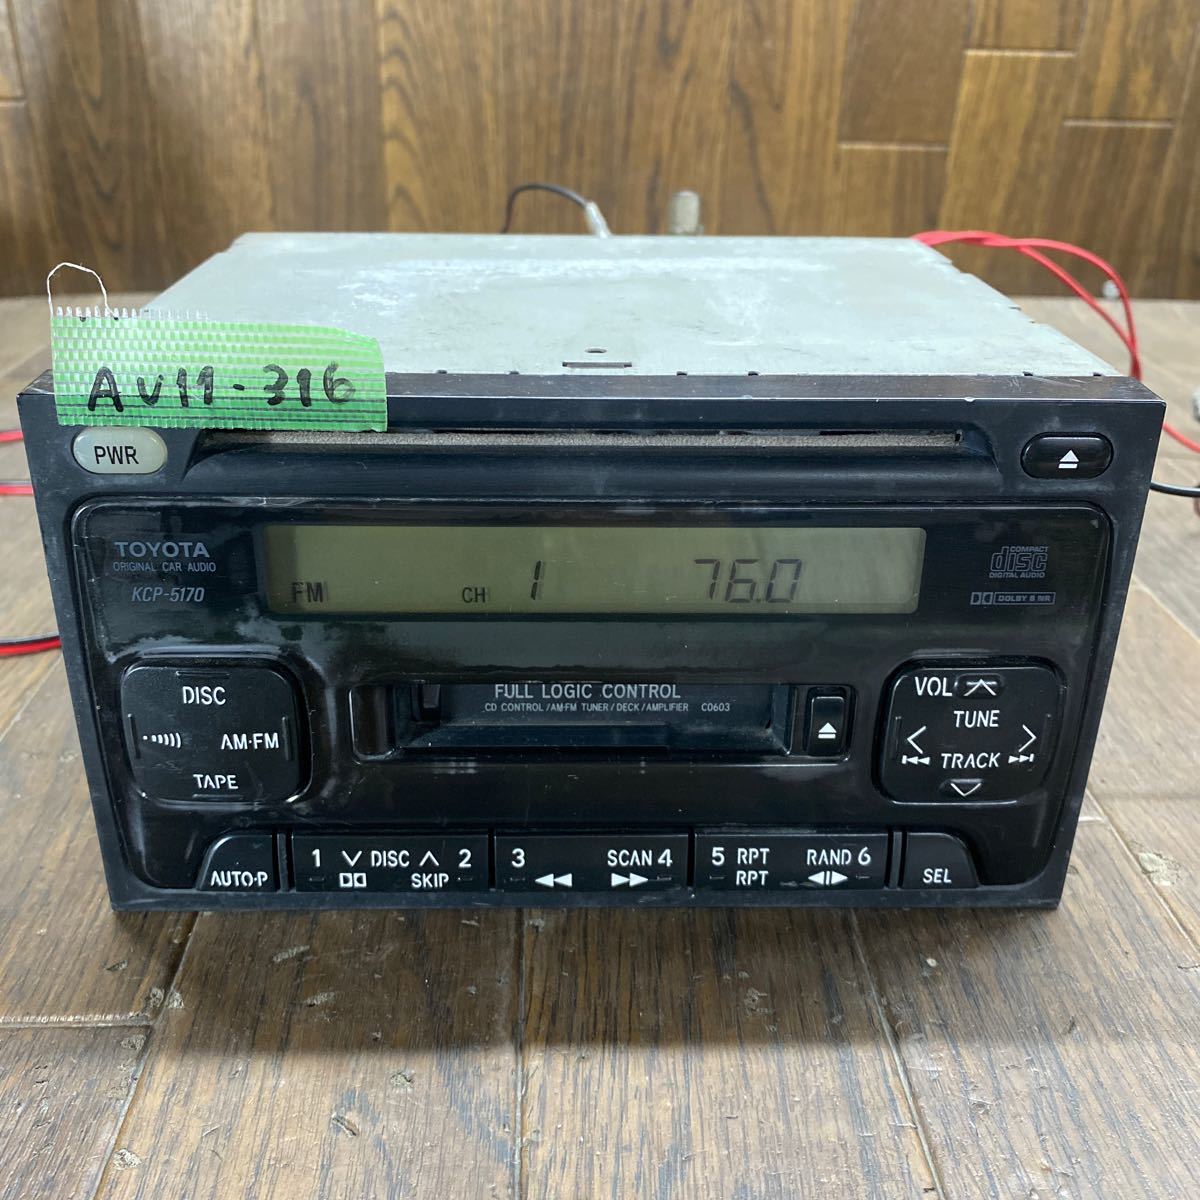 AV11-316 super-discount car stereo TOYOTA KCP-5170 08600-00780 Carrozzeria FH-M8026 cassette verification for wiring use simple operation verification ending used present condition goods 